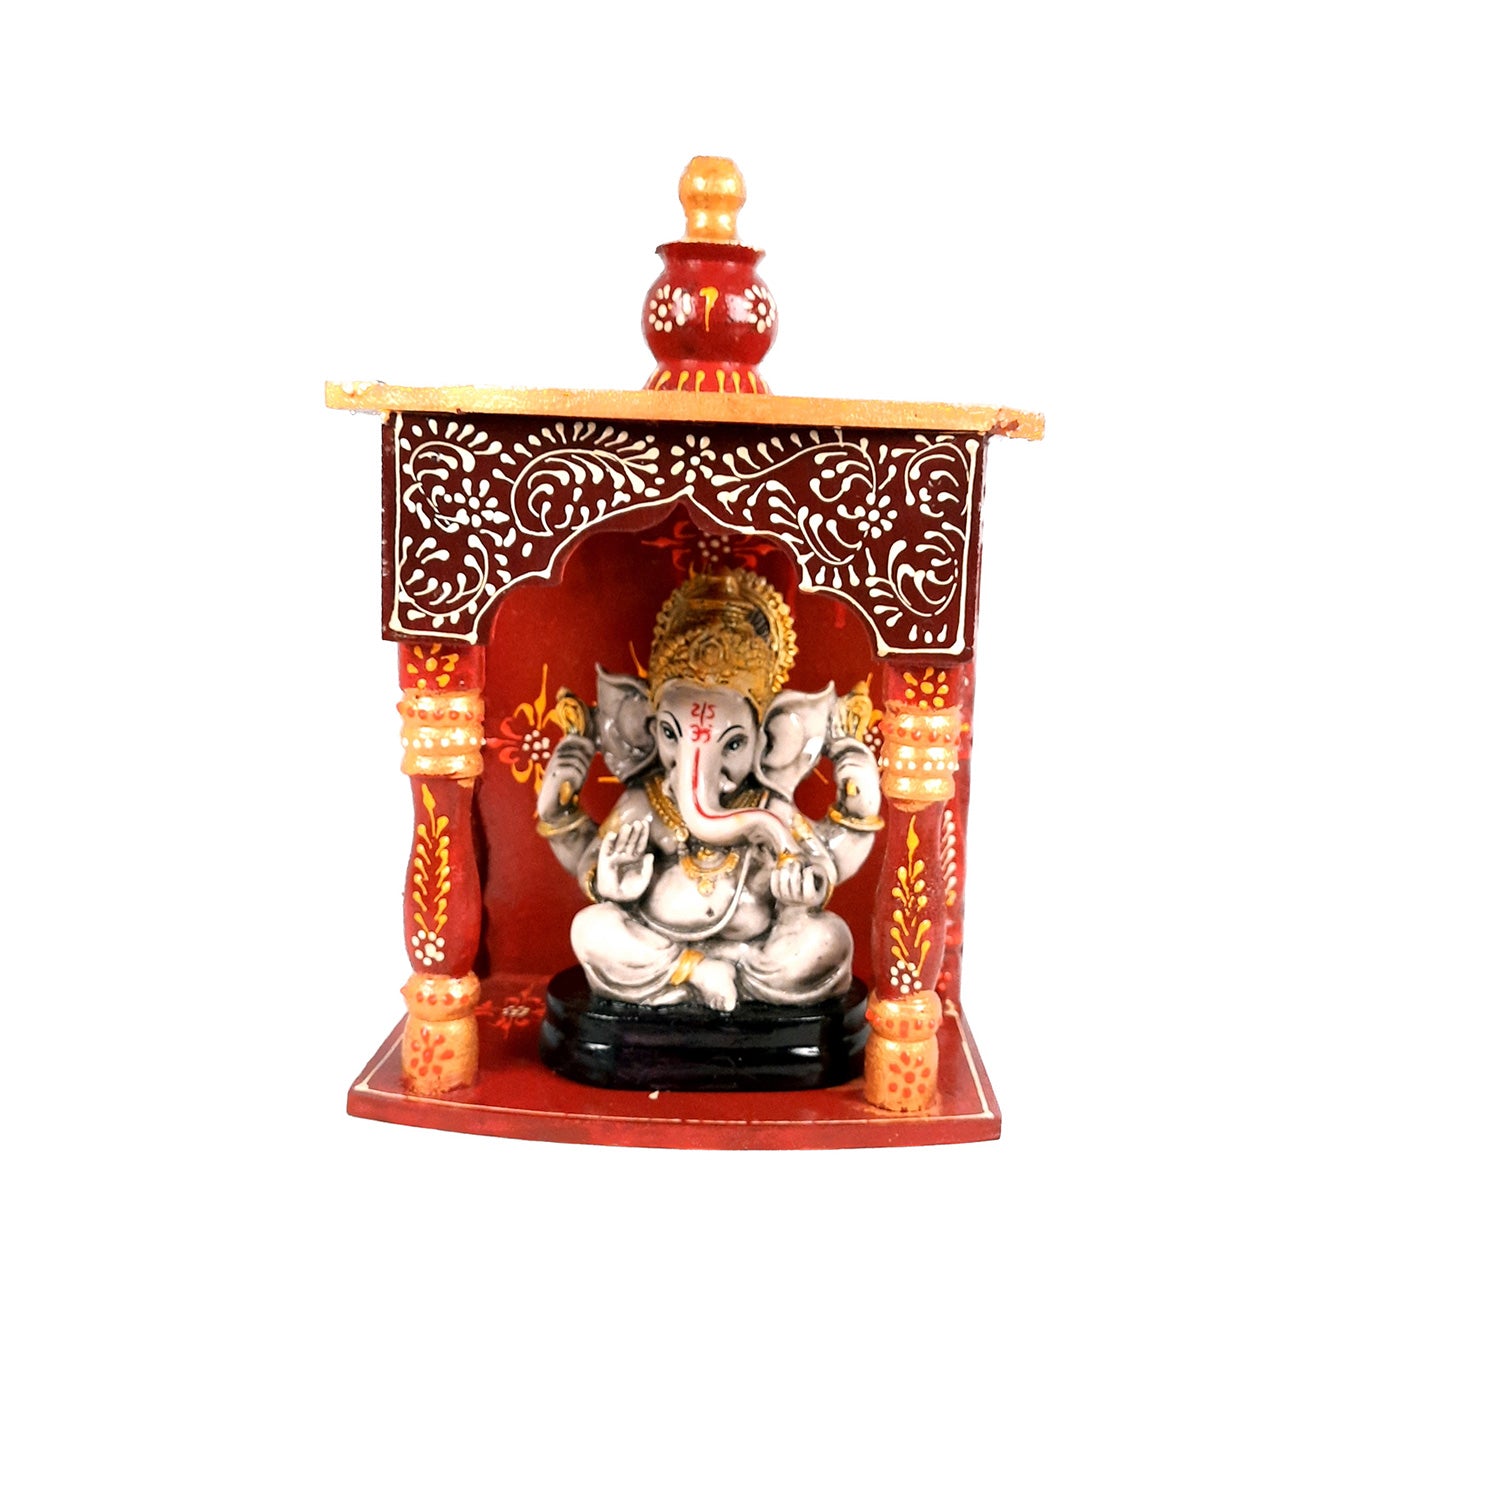 Pooja Temple Wooden | God Temple For Home | Puja Mandir Stand | Pooja Unit Small Wall Mounted – For Ghar, Office, Shop - 12 Inch - Apkamart